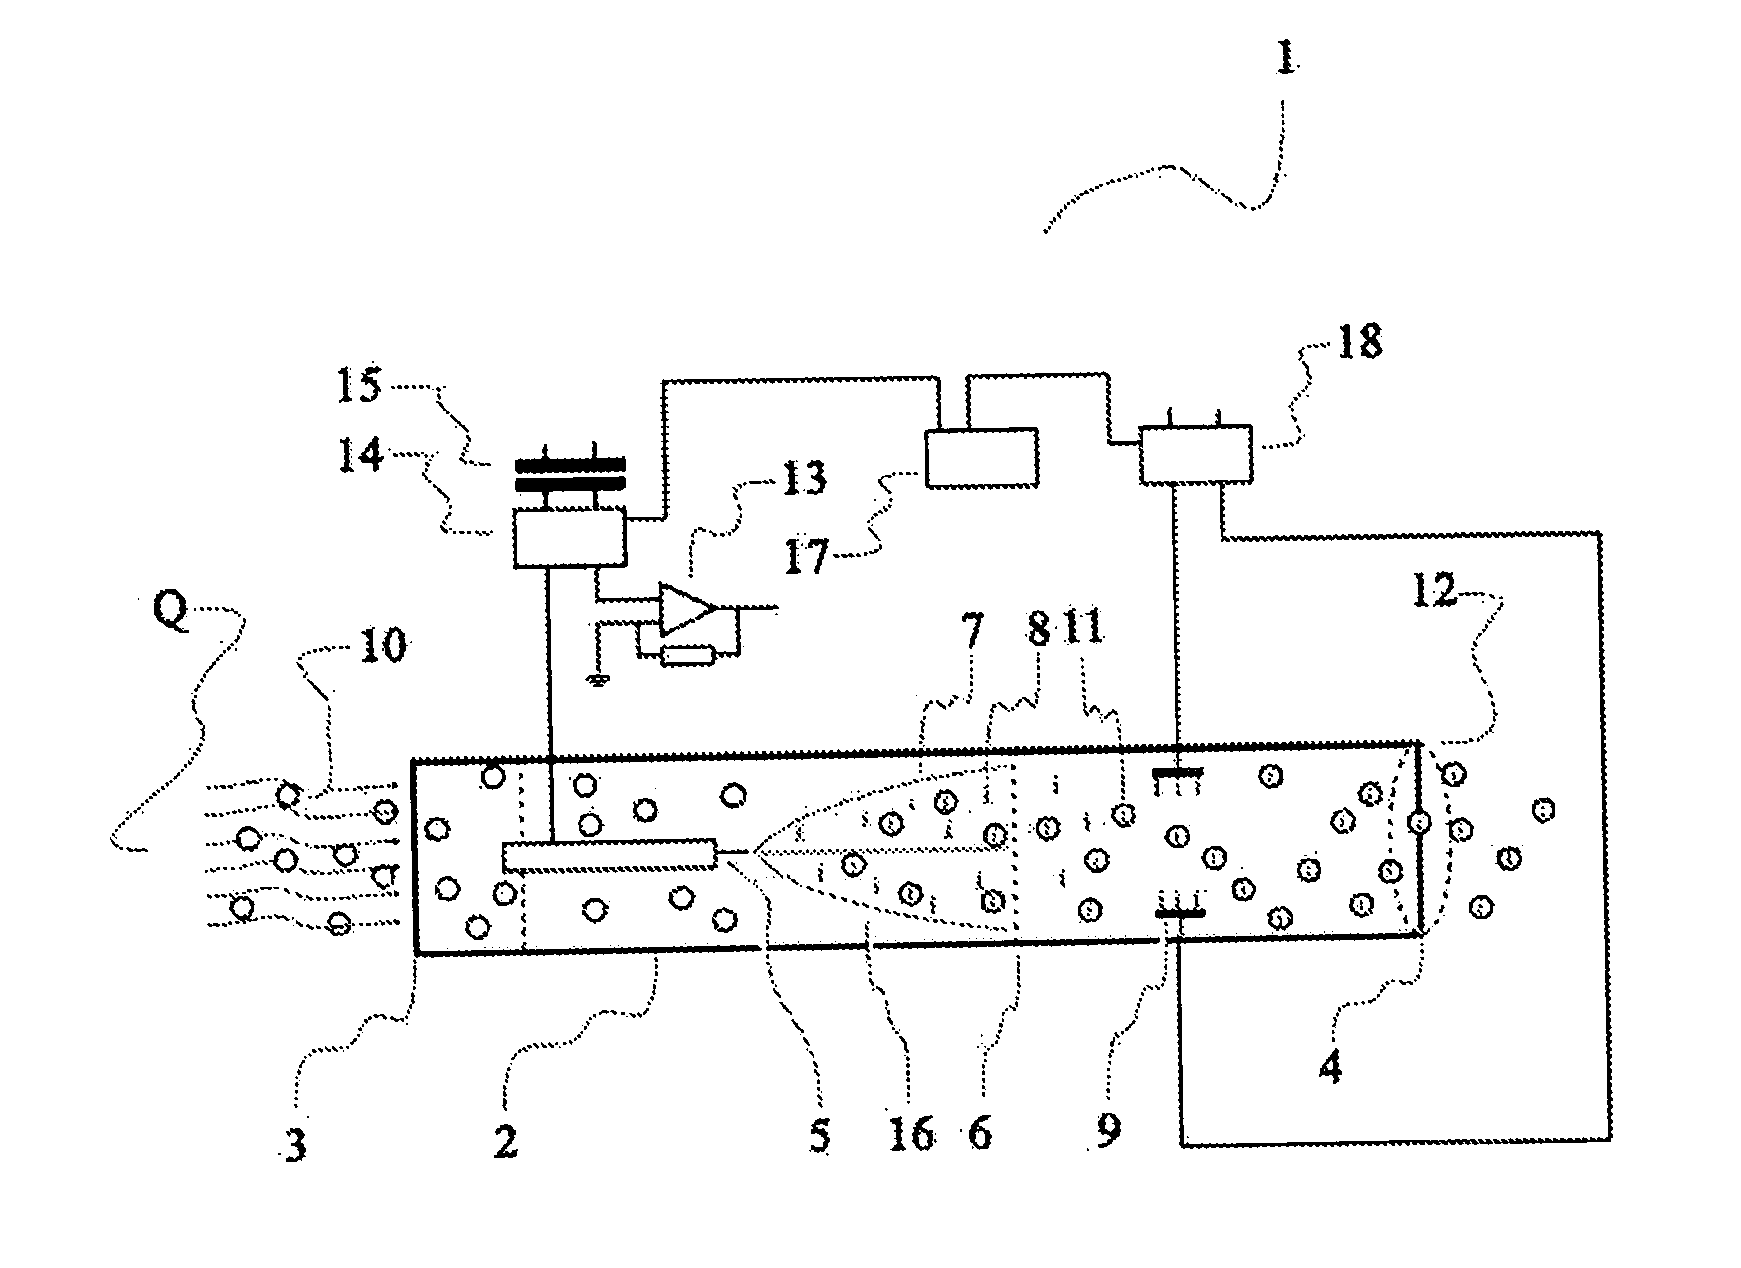 Apparatus and Process for Producing Acknowledged Air Flow and The Use of Such Apparatus in Measuring Particle Concentration in Acknowledged Air Flow